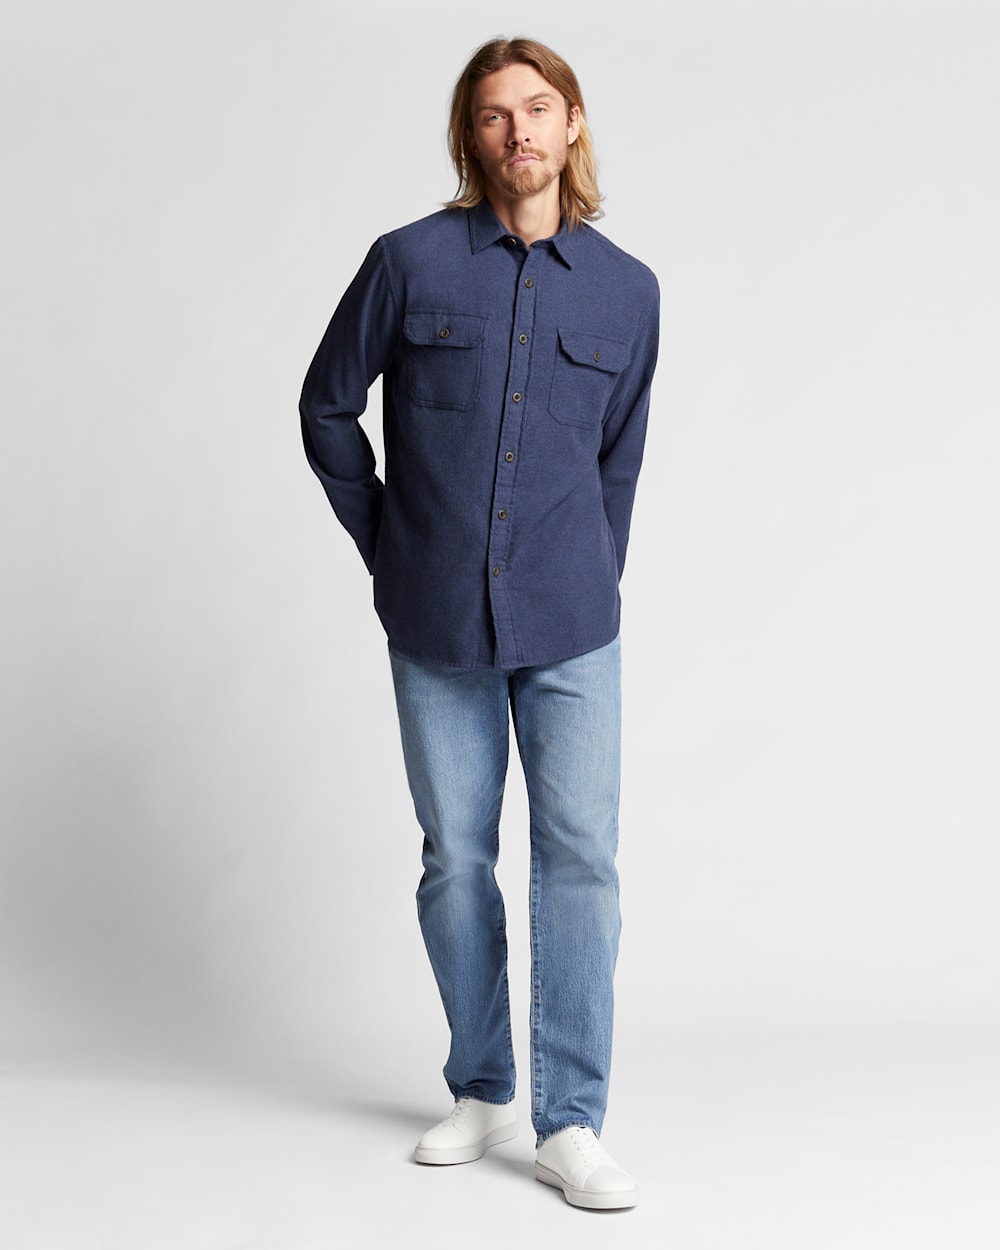 ALTERNATE VIEW OF BURNSIDE DOUBLE-BRUSHED FLANNEL SHIRT IN BLUE image number 7